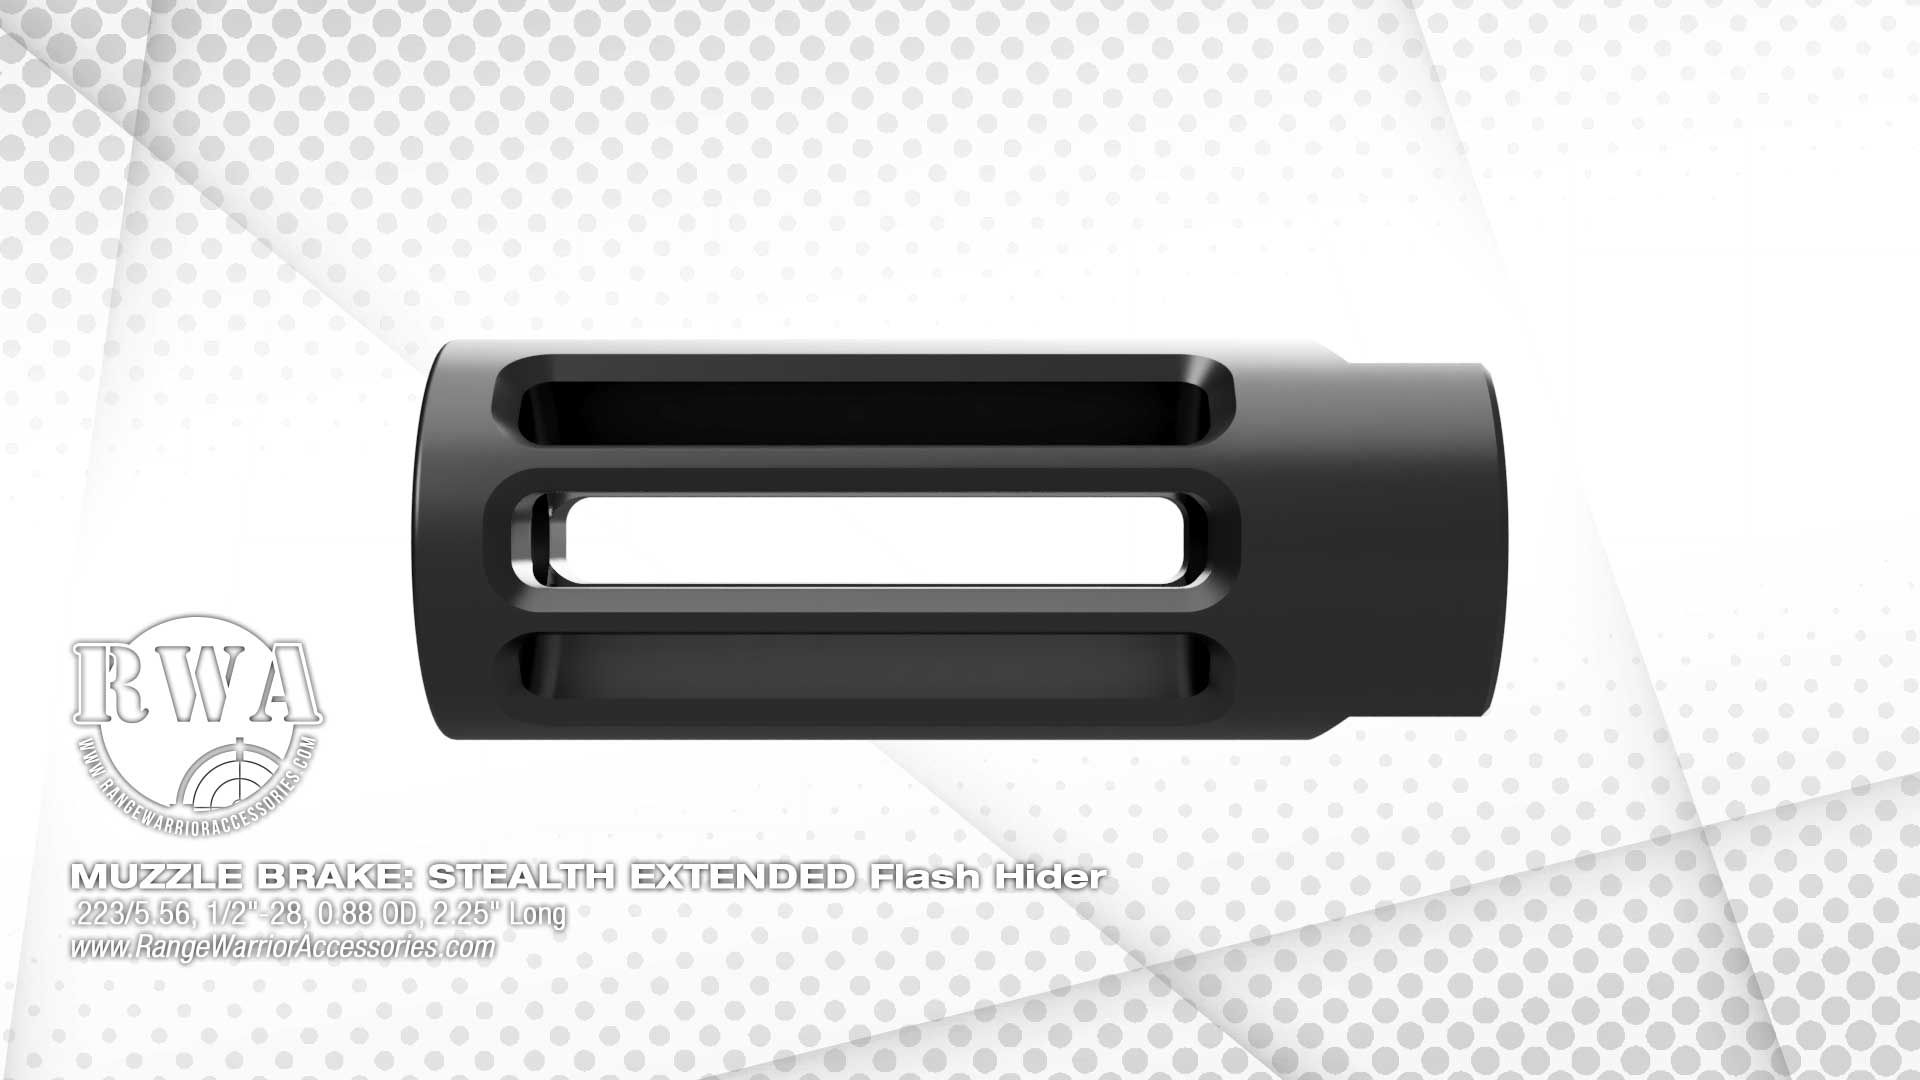 Stealth Extended Flash Hider